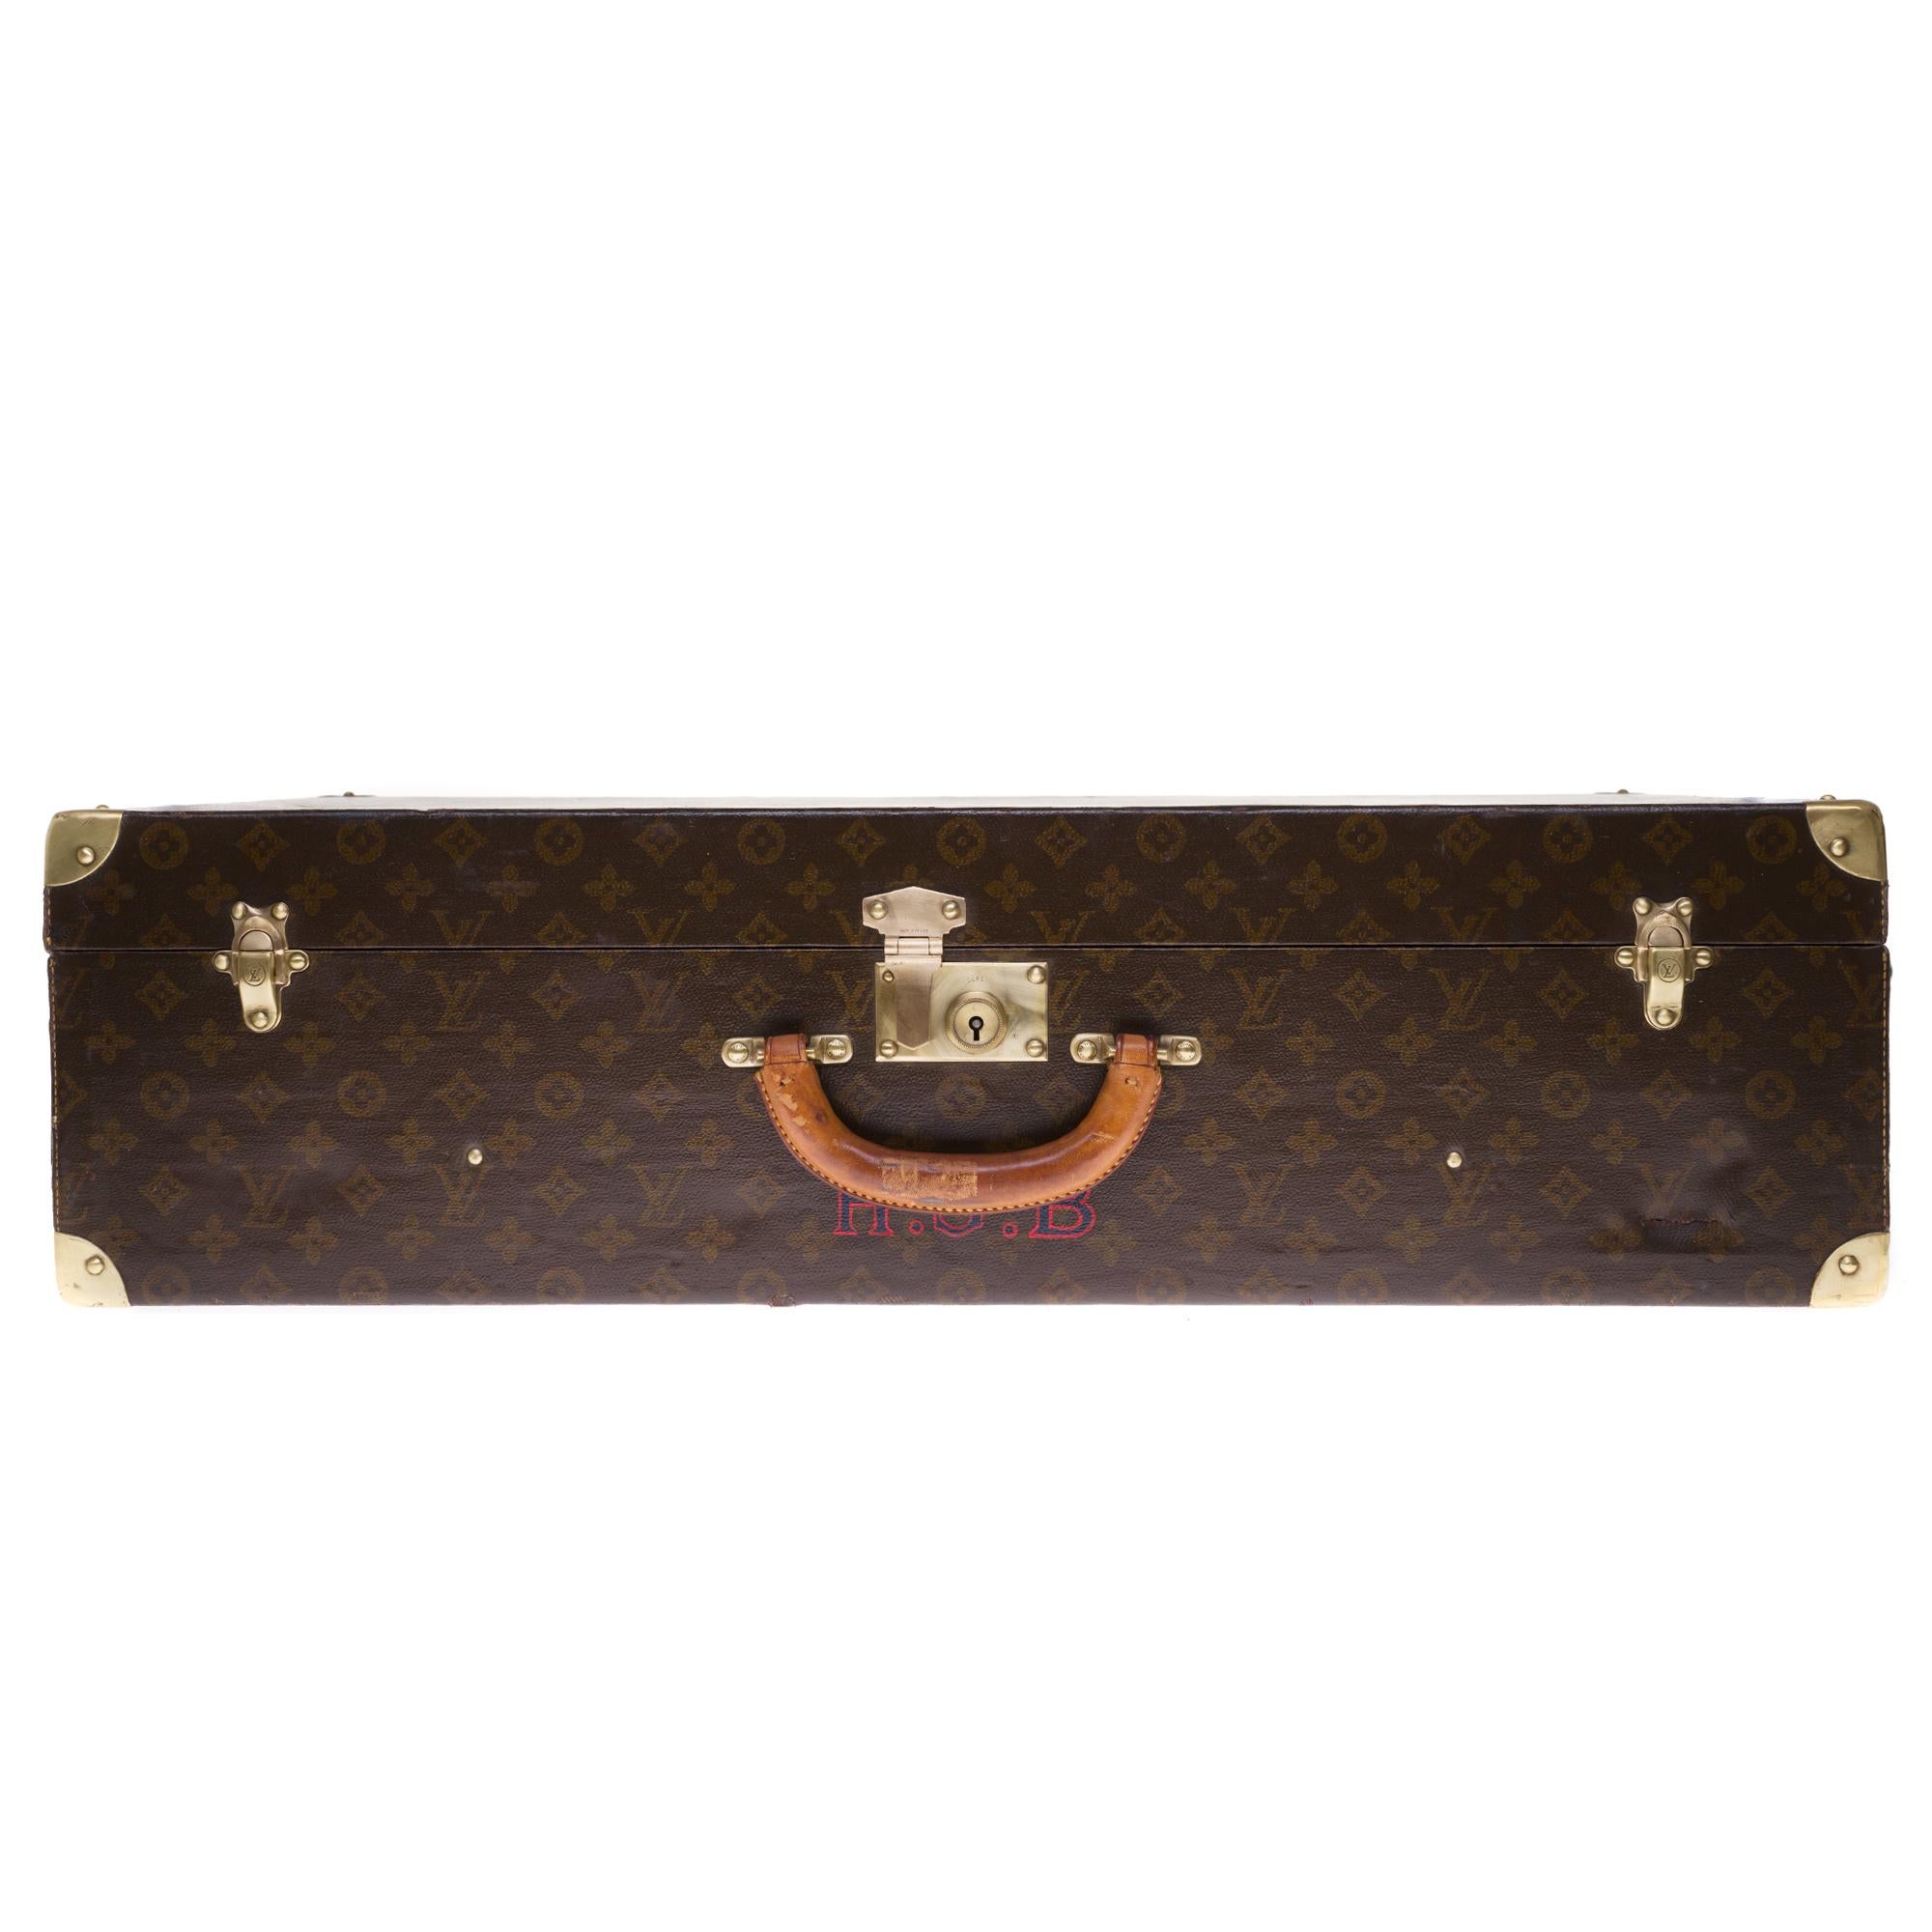 Beautiful decorative and collectible object: Louis Vuitton Suitcase 75cm in monogram canvas, label with serial number, brass hardware, natural leather handle allowing a handstand.

Three brass clasps.
Lining in beige canvas, two straps to hold